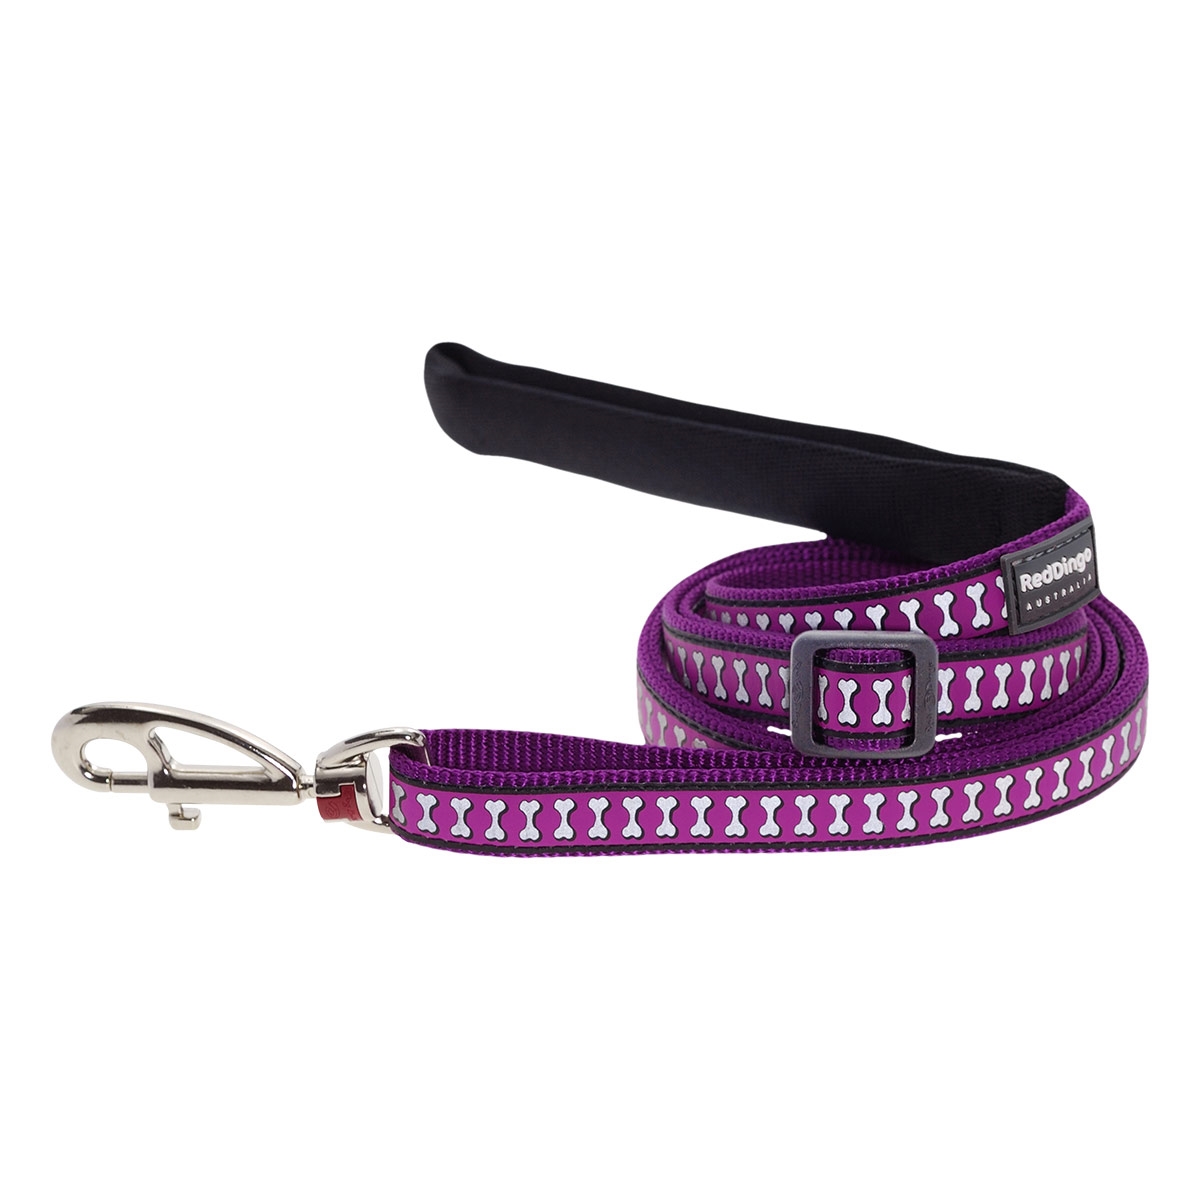 Picture of Red Dingo L6-RB-PU-15 Dog Lead Reflective Bones Purple - Small 6ft